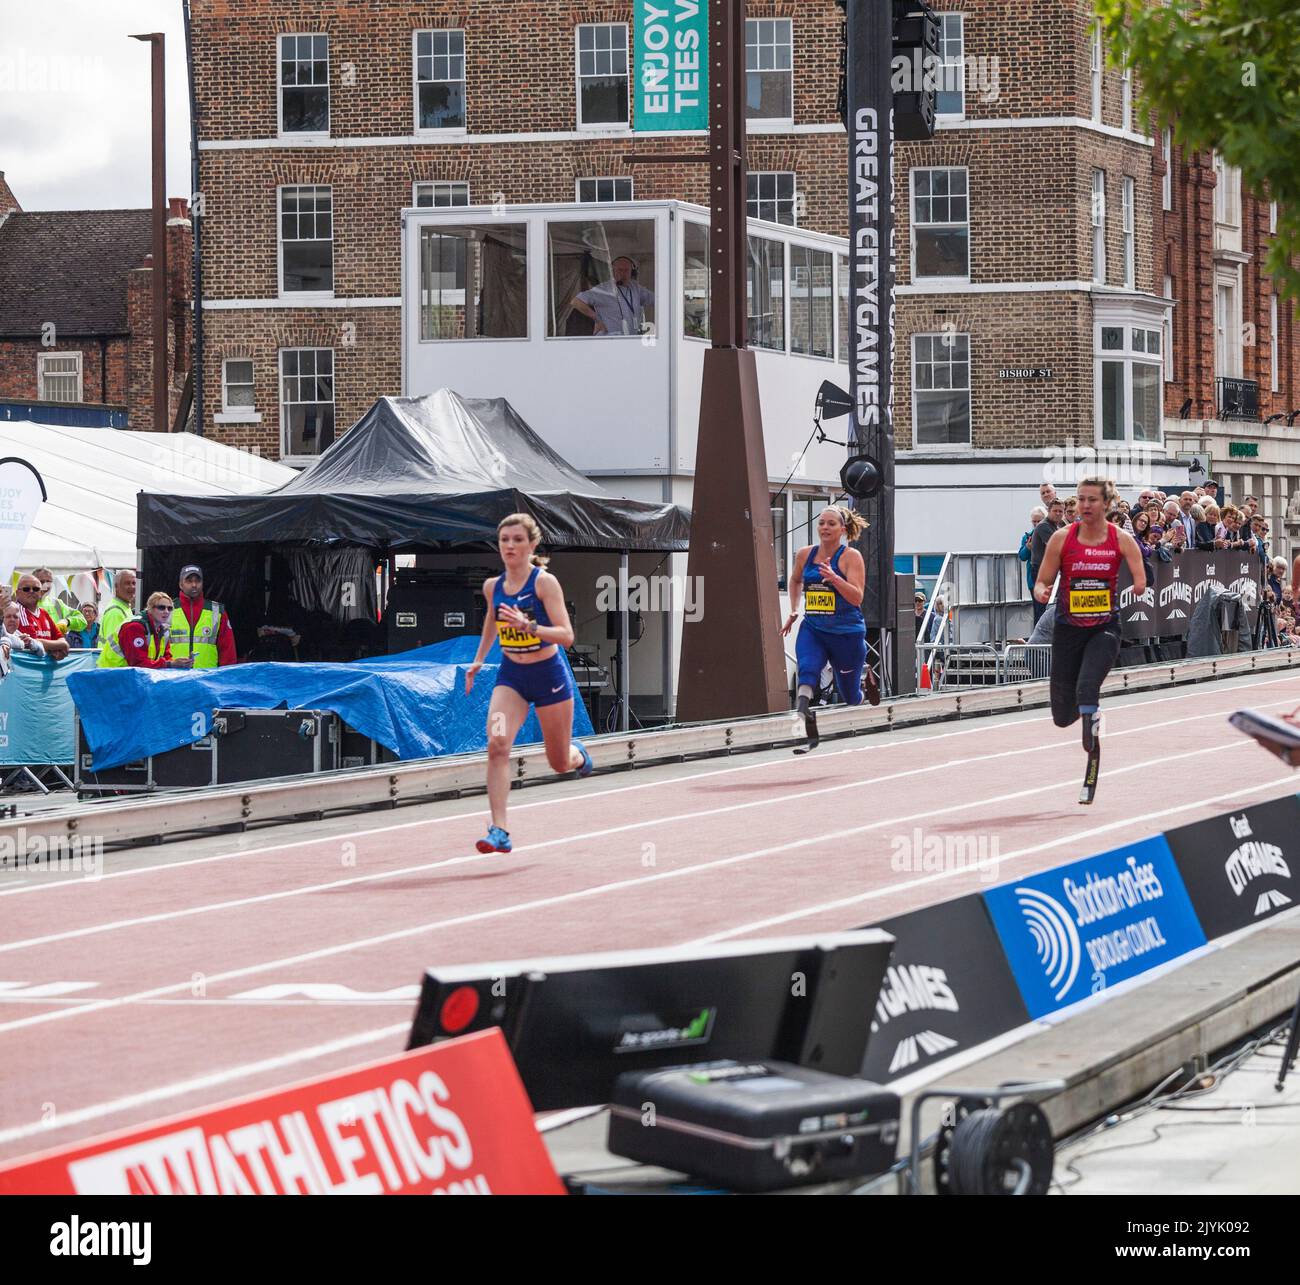 Sophie Hahn winning her sprint race in the Great North City Games which were held in the High Street, Stockton on Tees,England,UK Stock Photo